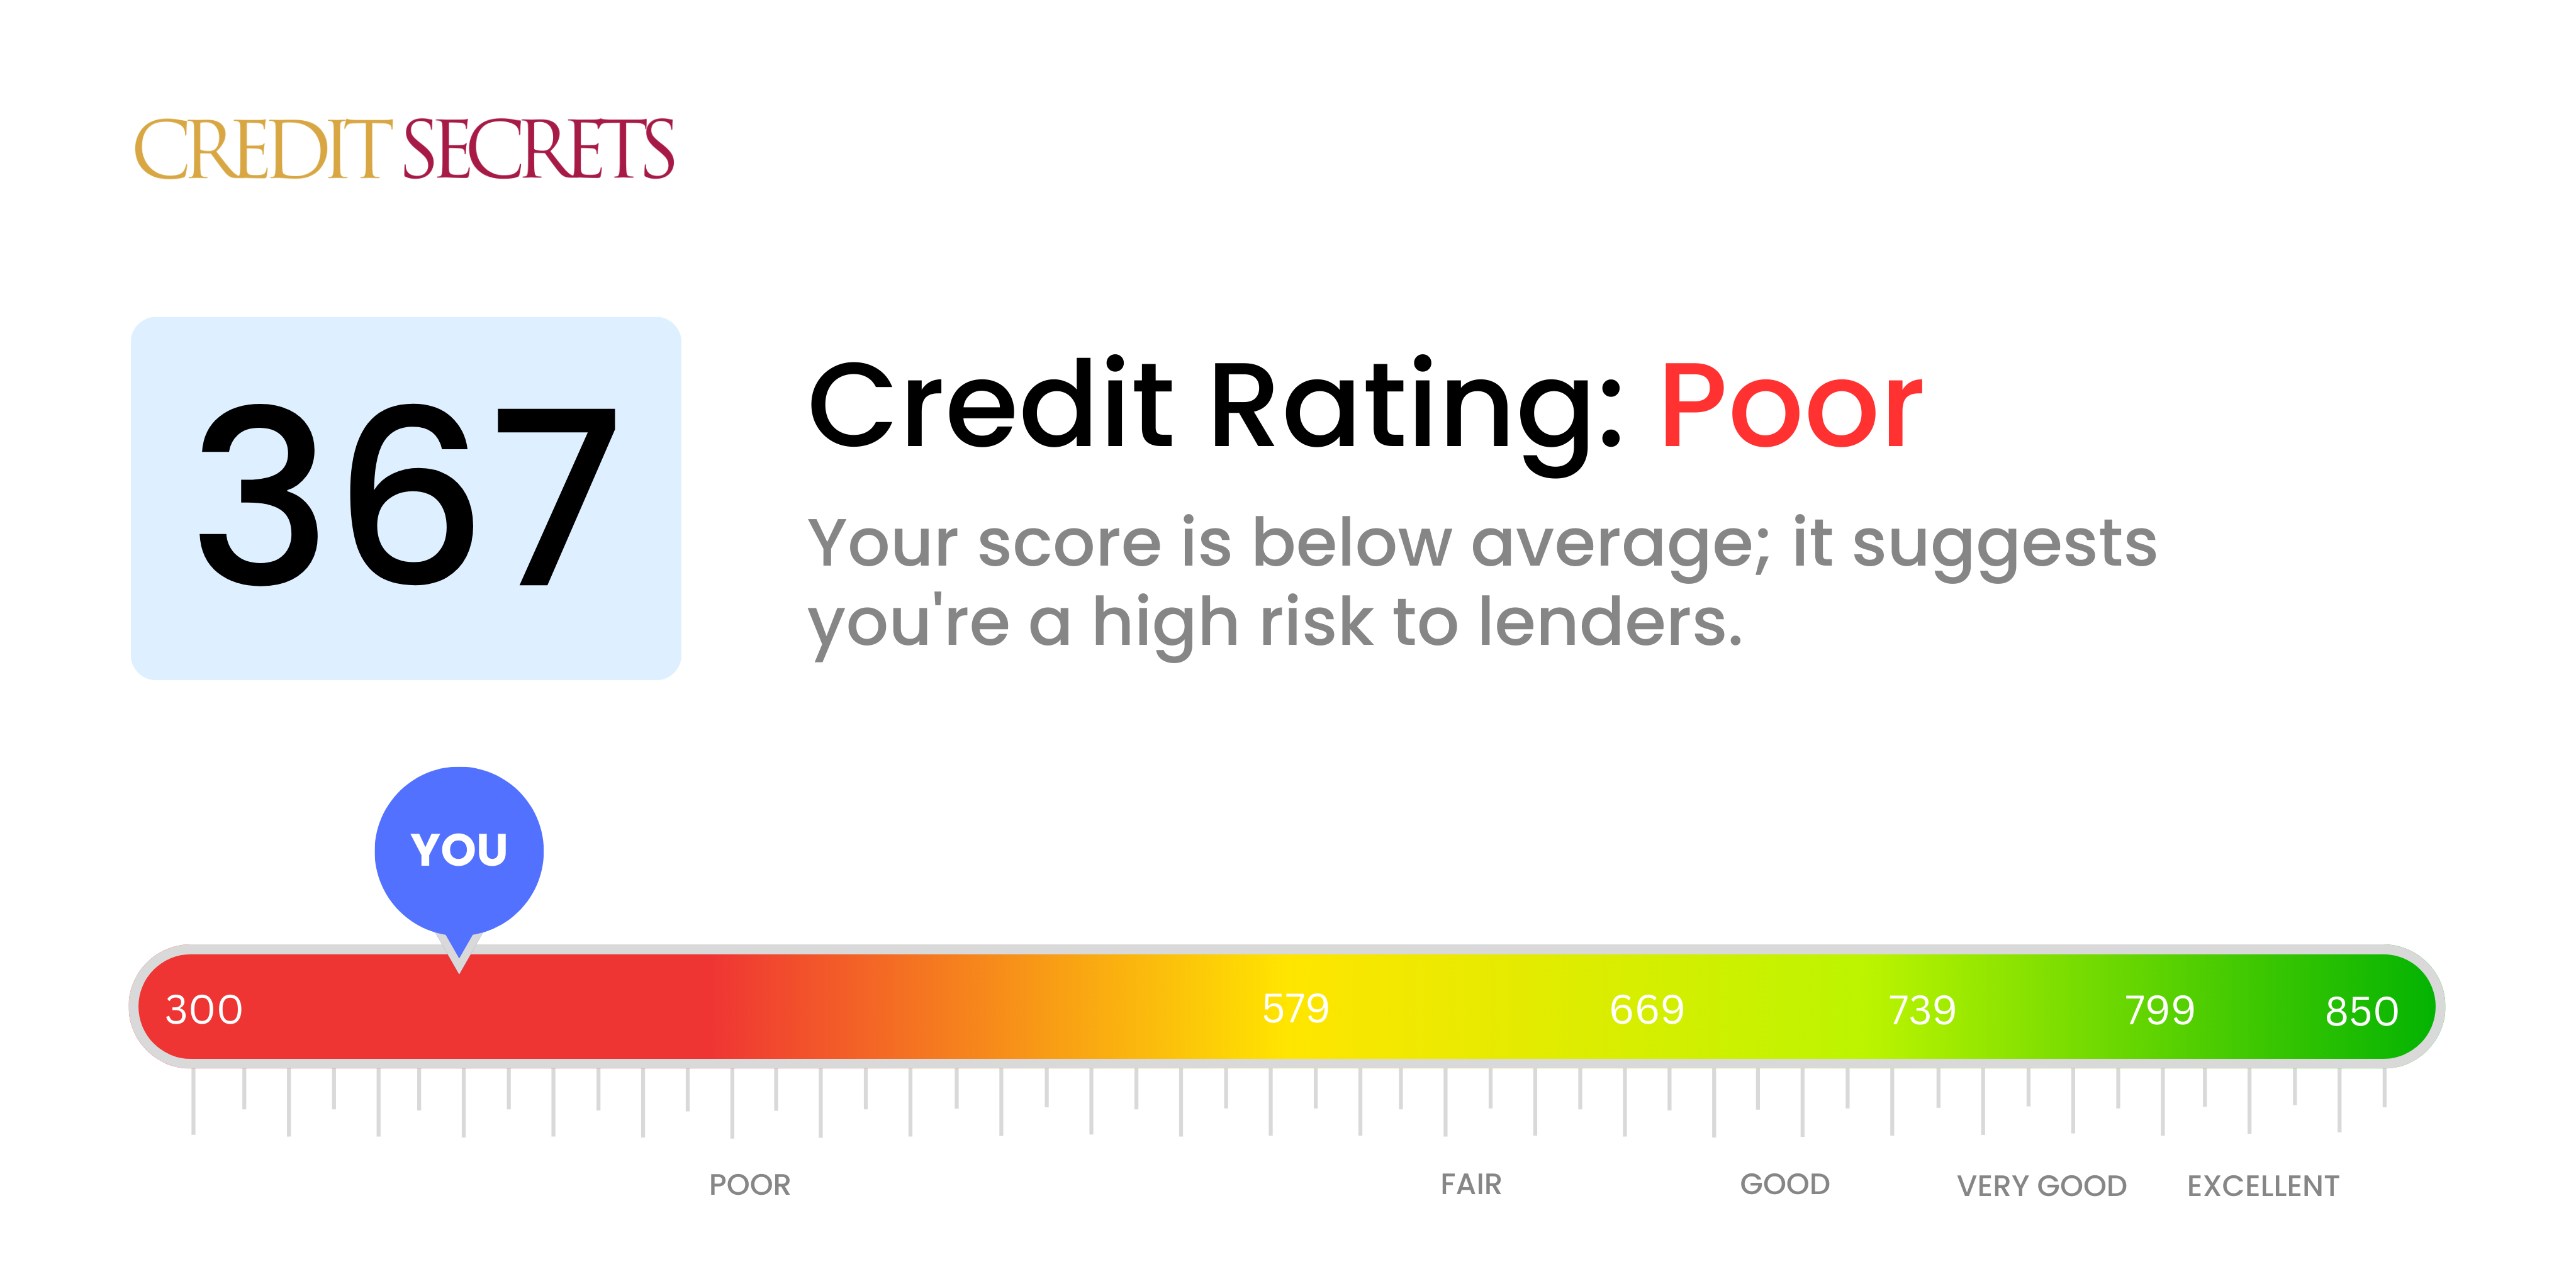 Is 367 a good credit score?